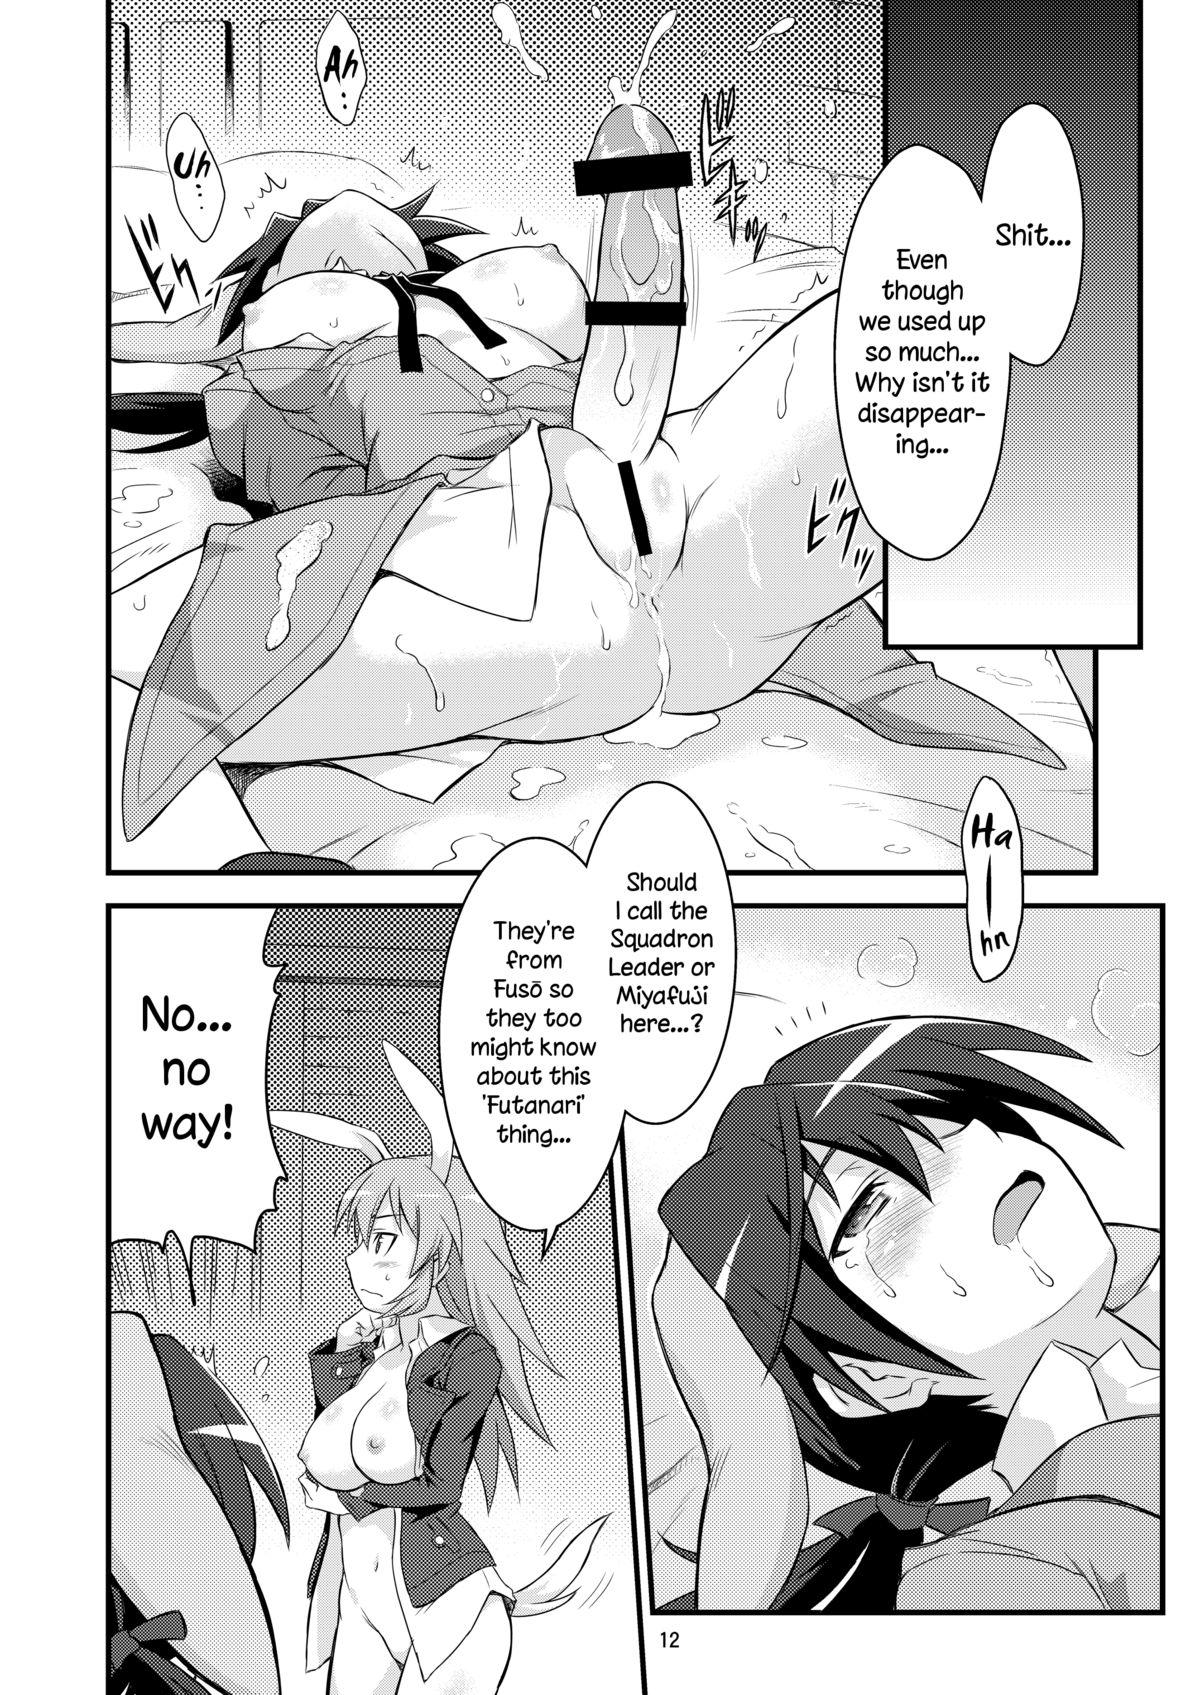 Kink Shir and Gert in Big Trouble - Strike witches Bailando - Page 12